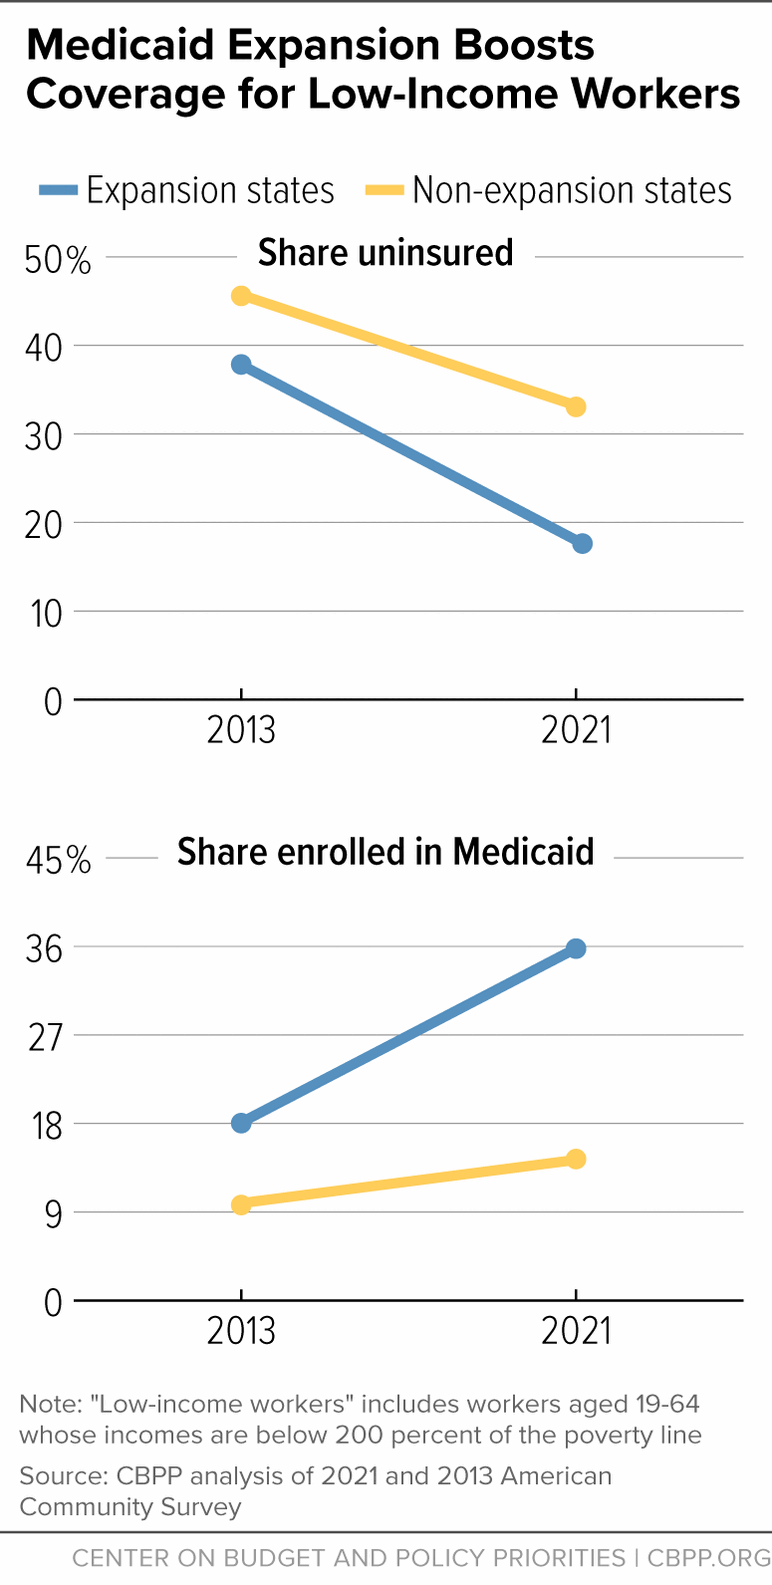 Medicaid Expansion Boosts Coverage for Low-Income Workers